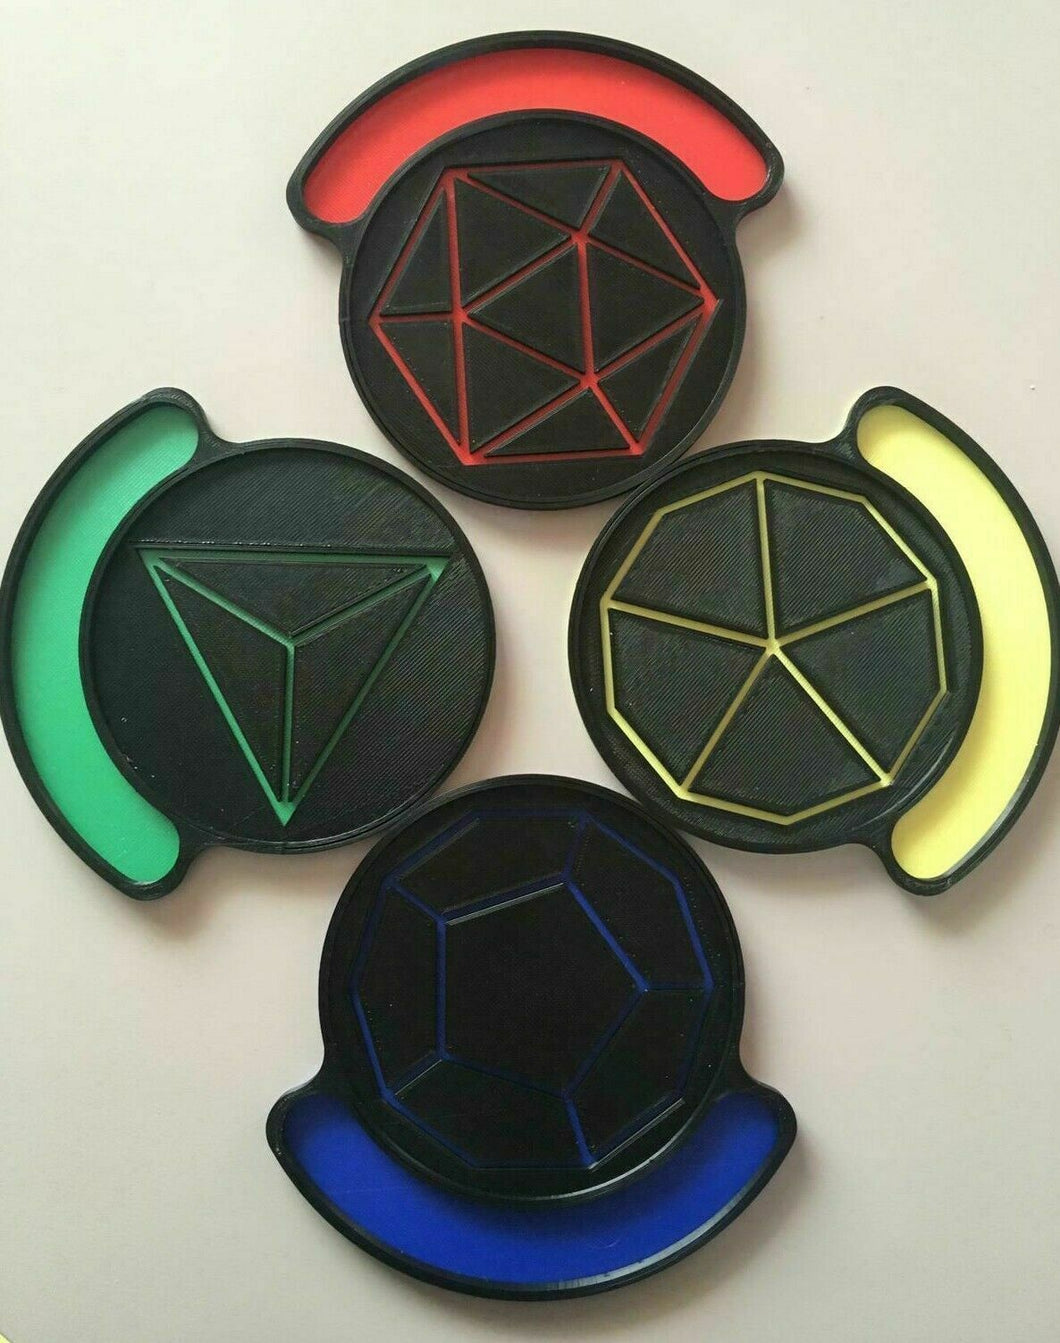 Dungeons and Dragon Style D&D Coaster Set D4, D10, D12 and D20 Style